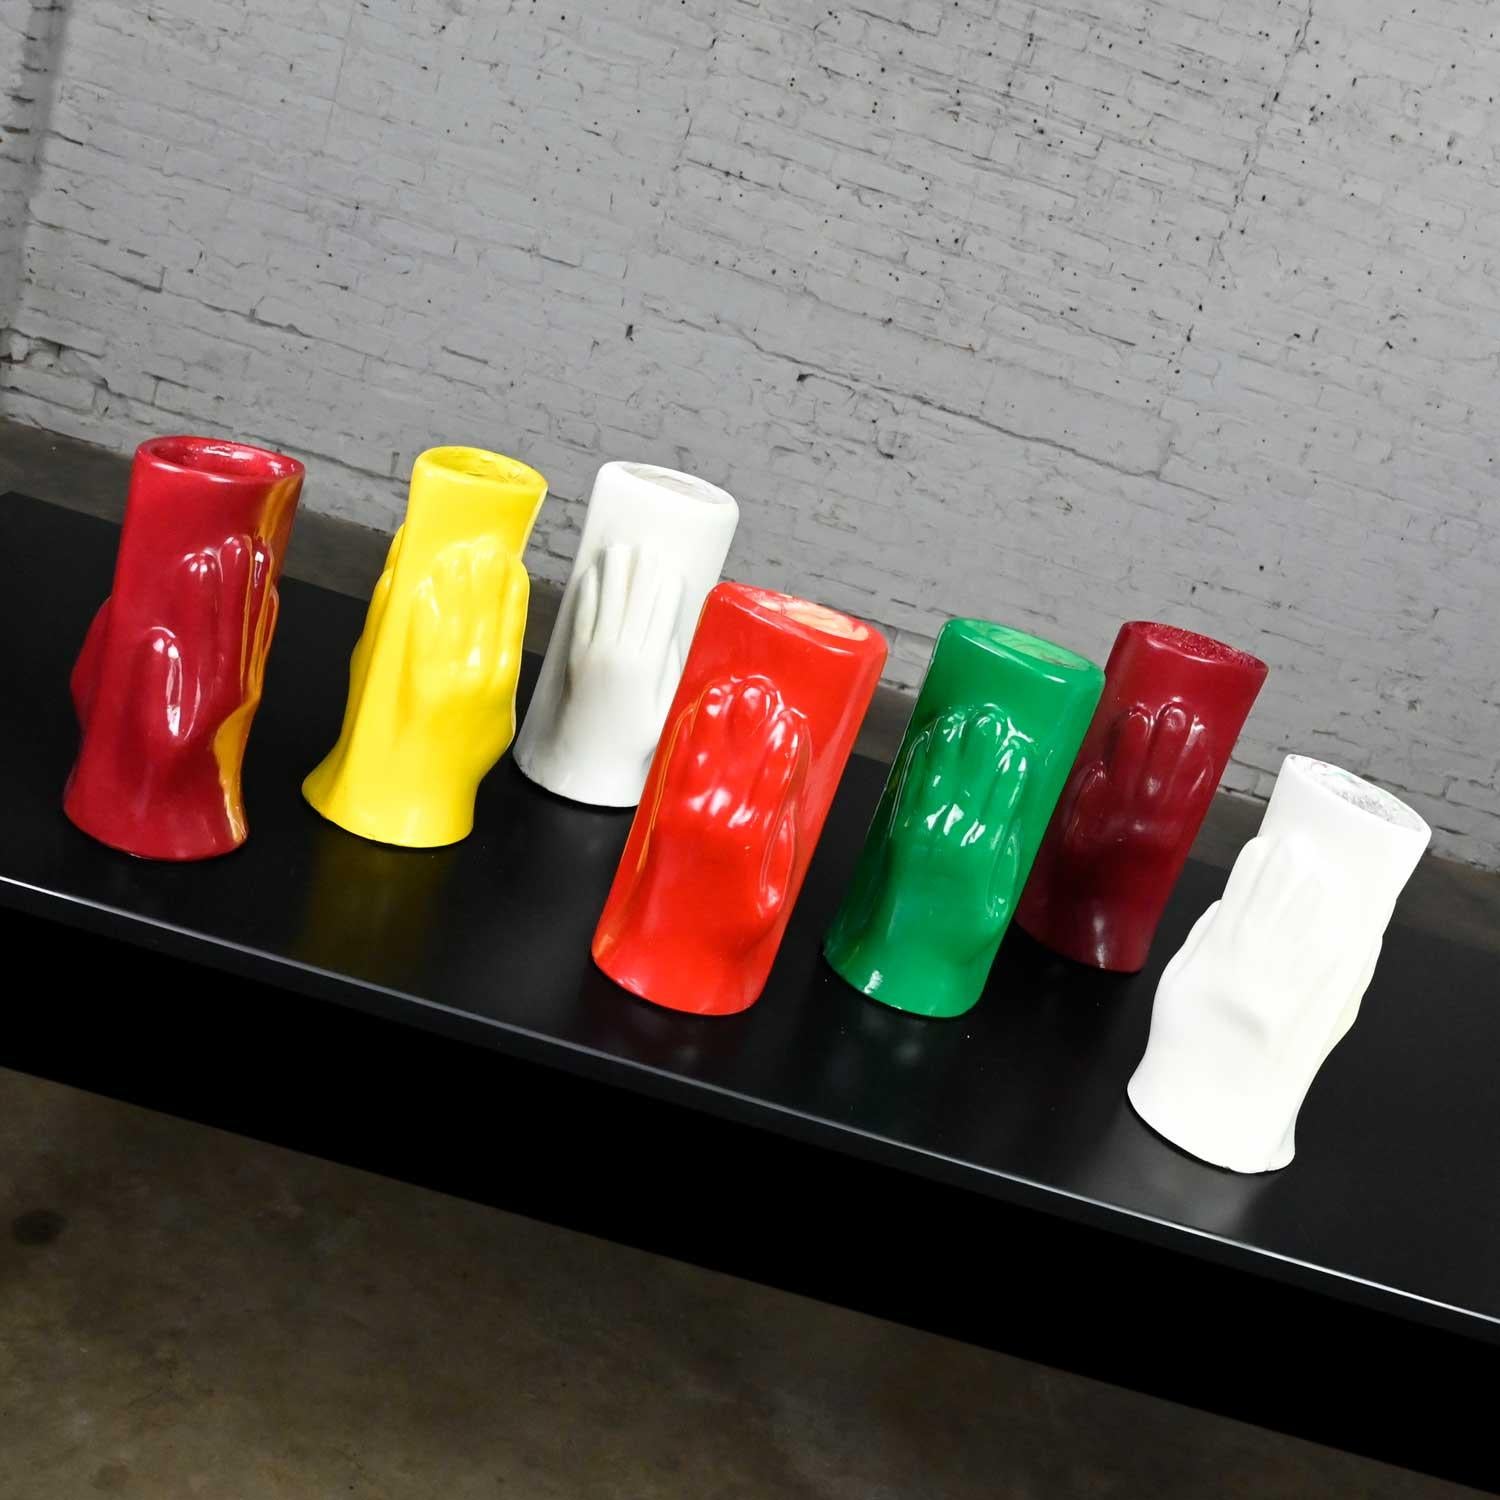 Folk Art Multi Color Molded Plastic or Acrylic Hand Vases Set of 7 For Sale 10